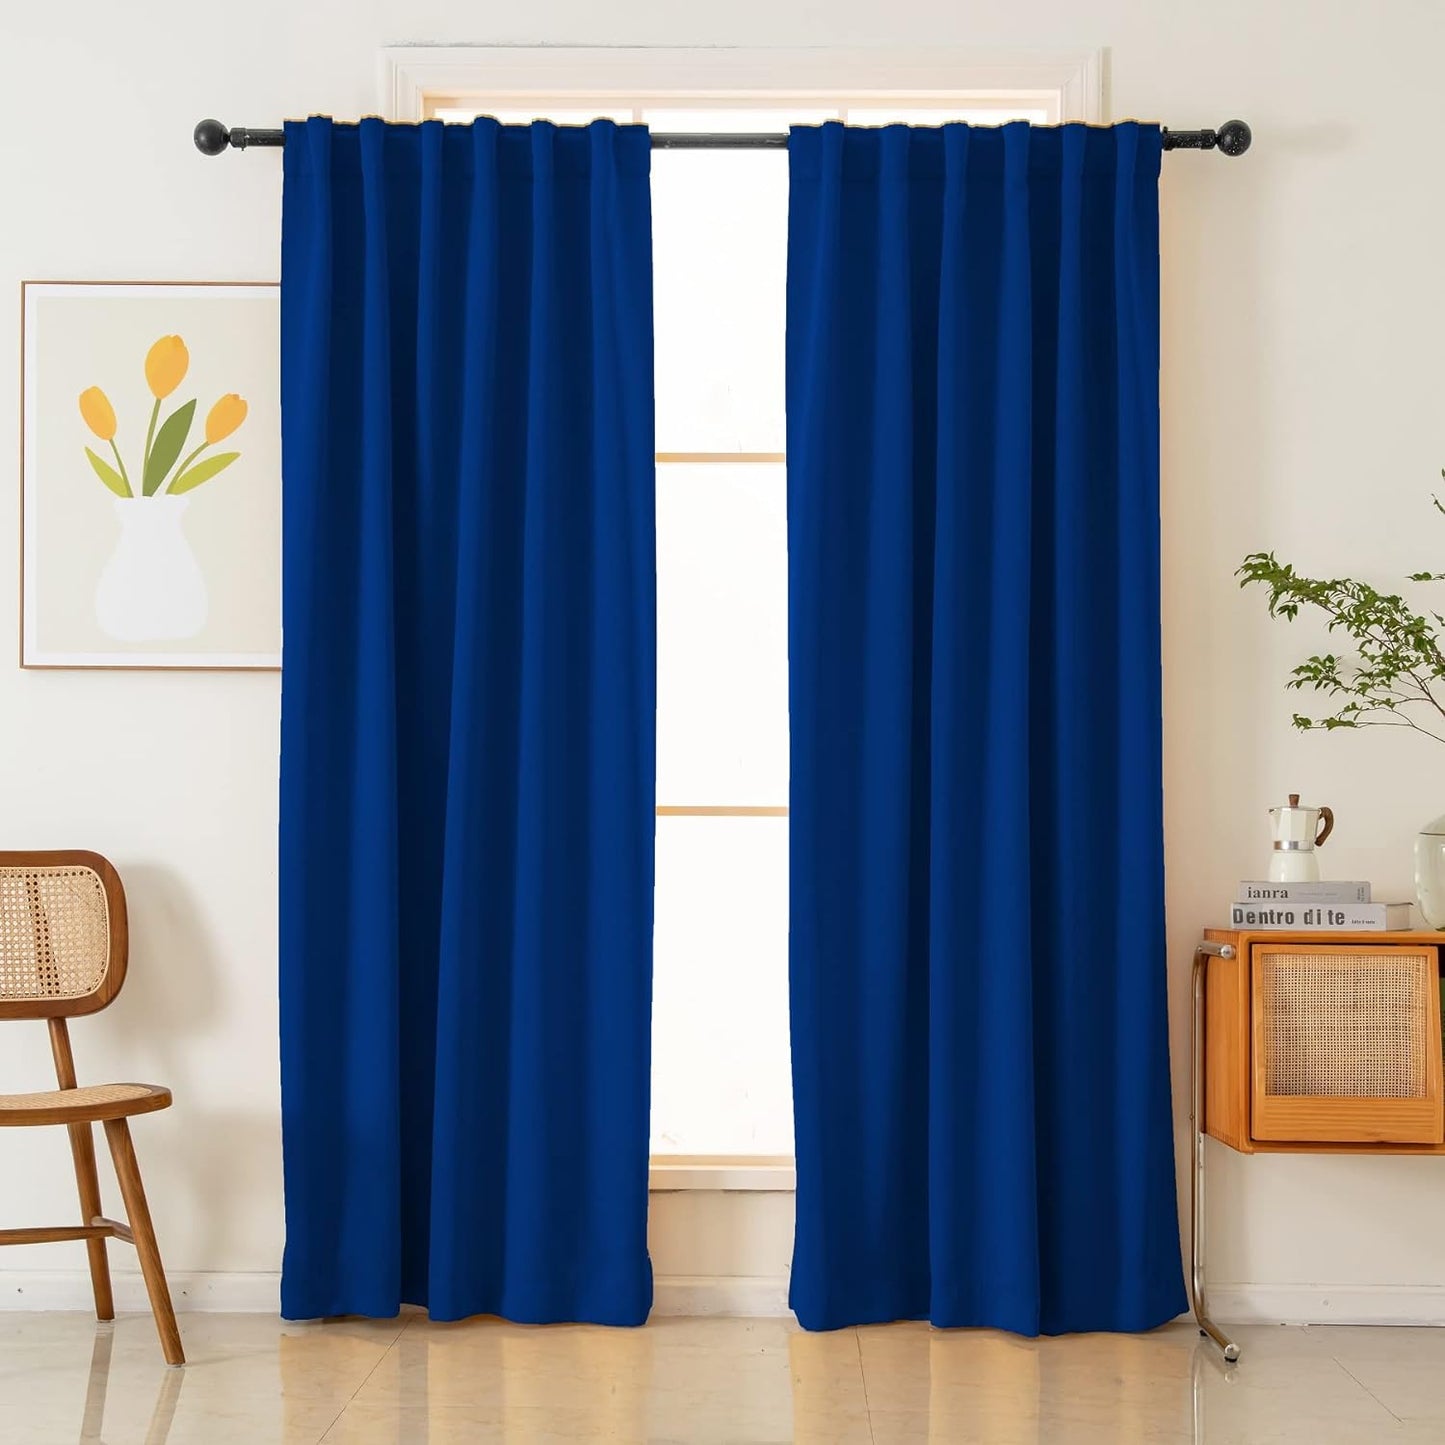 Pickluc Blackout Curtains 96 Inches Long 2 Panels, Black Out Drapes for Bedroom or Living Room, Back Tab and Rod Pocket Top, Set of Two, Dark Grey, 52" Wide and 96" Length.  Pickluc Classic Blue 52"W X 96"L 